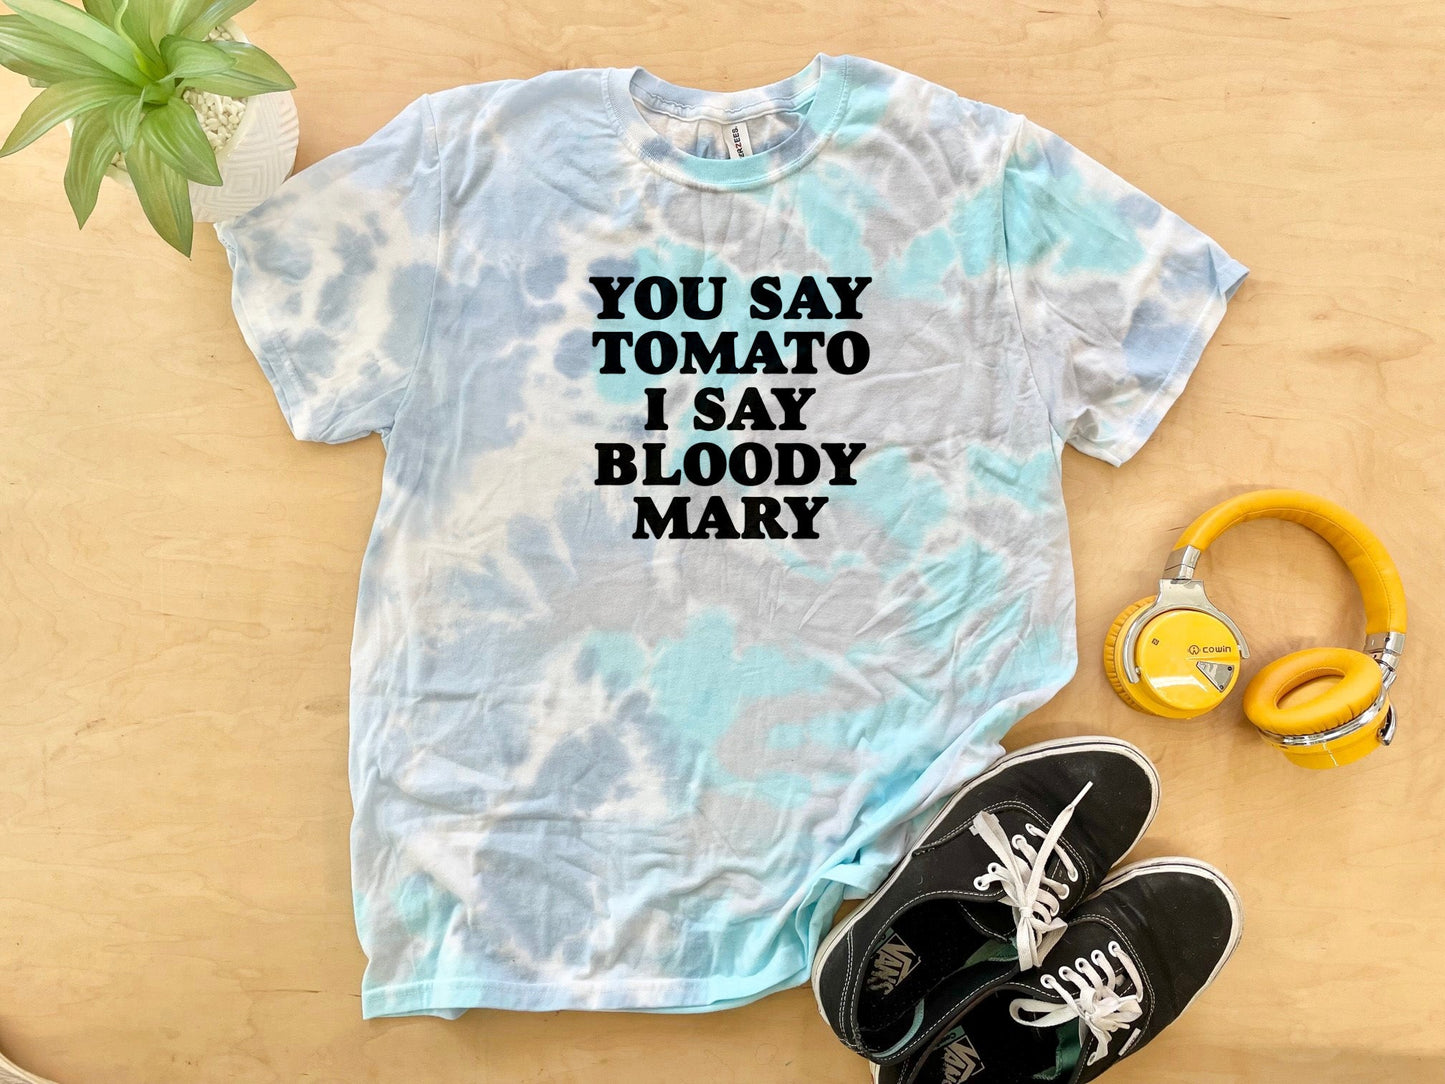 You Say Tomato I Say Bloody Mary - Mens/Unisex Tie Dye Tee - Blue